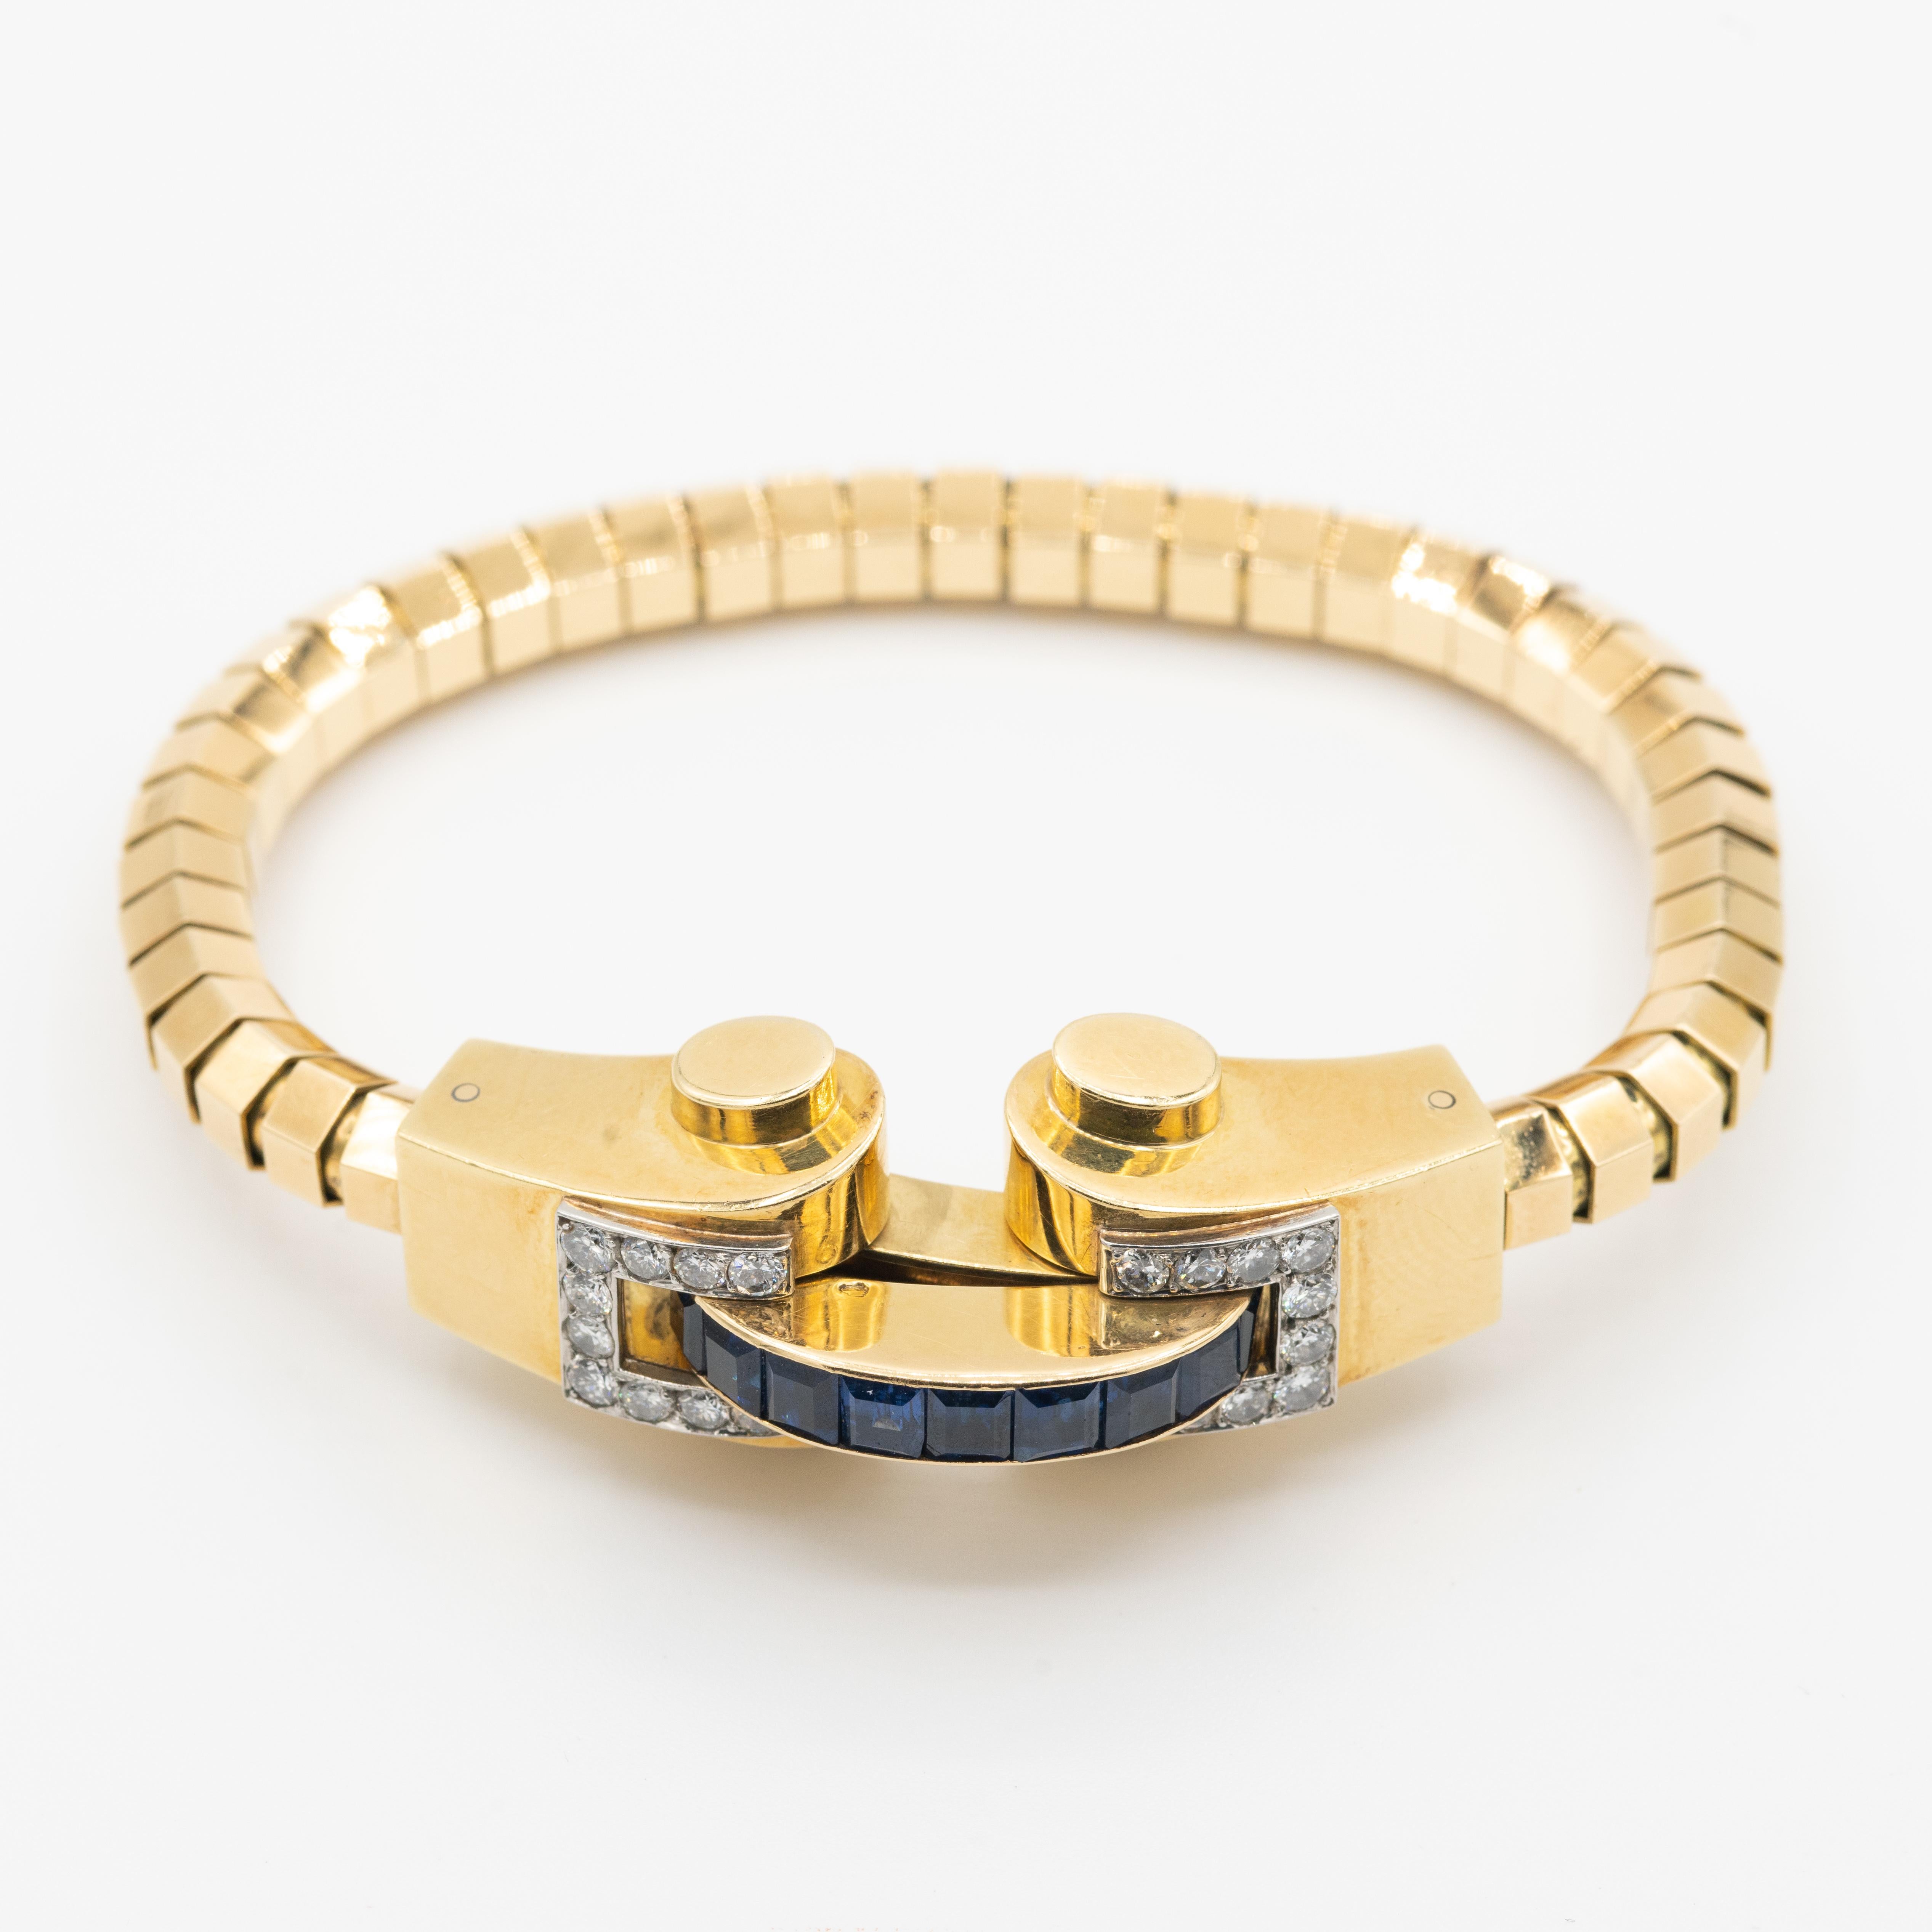 Maker: Boucheron Paris
Period: Retro
Year: 1930s-1940s
Material: 18K Yellow Gold, 1.20cts Diamond, 4.20cts Sapphire
Weight: 47 grams
Length: 18.5cm/7.2 inches
Size: Fits up to 6.8 inch wrist
Condition: Pristine Vintage
Includes: Original signed